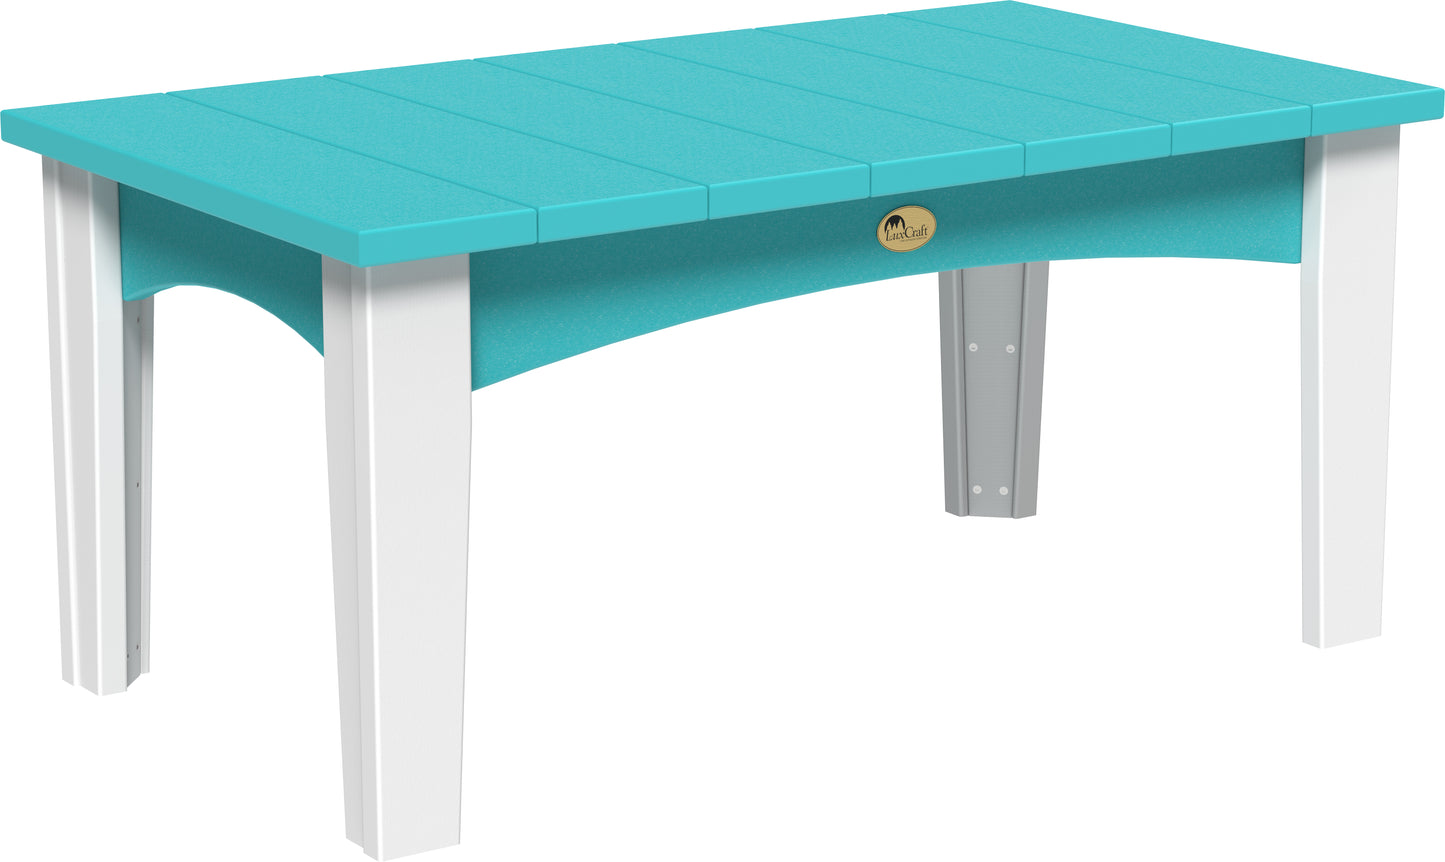 LuxCraft Recycled Plastic Island Coffee Table - LEAD TIME TO SHIP 3 TO 4 WEEKS